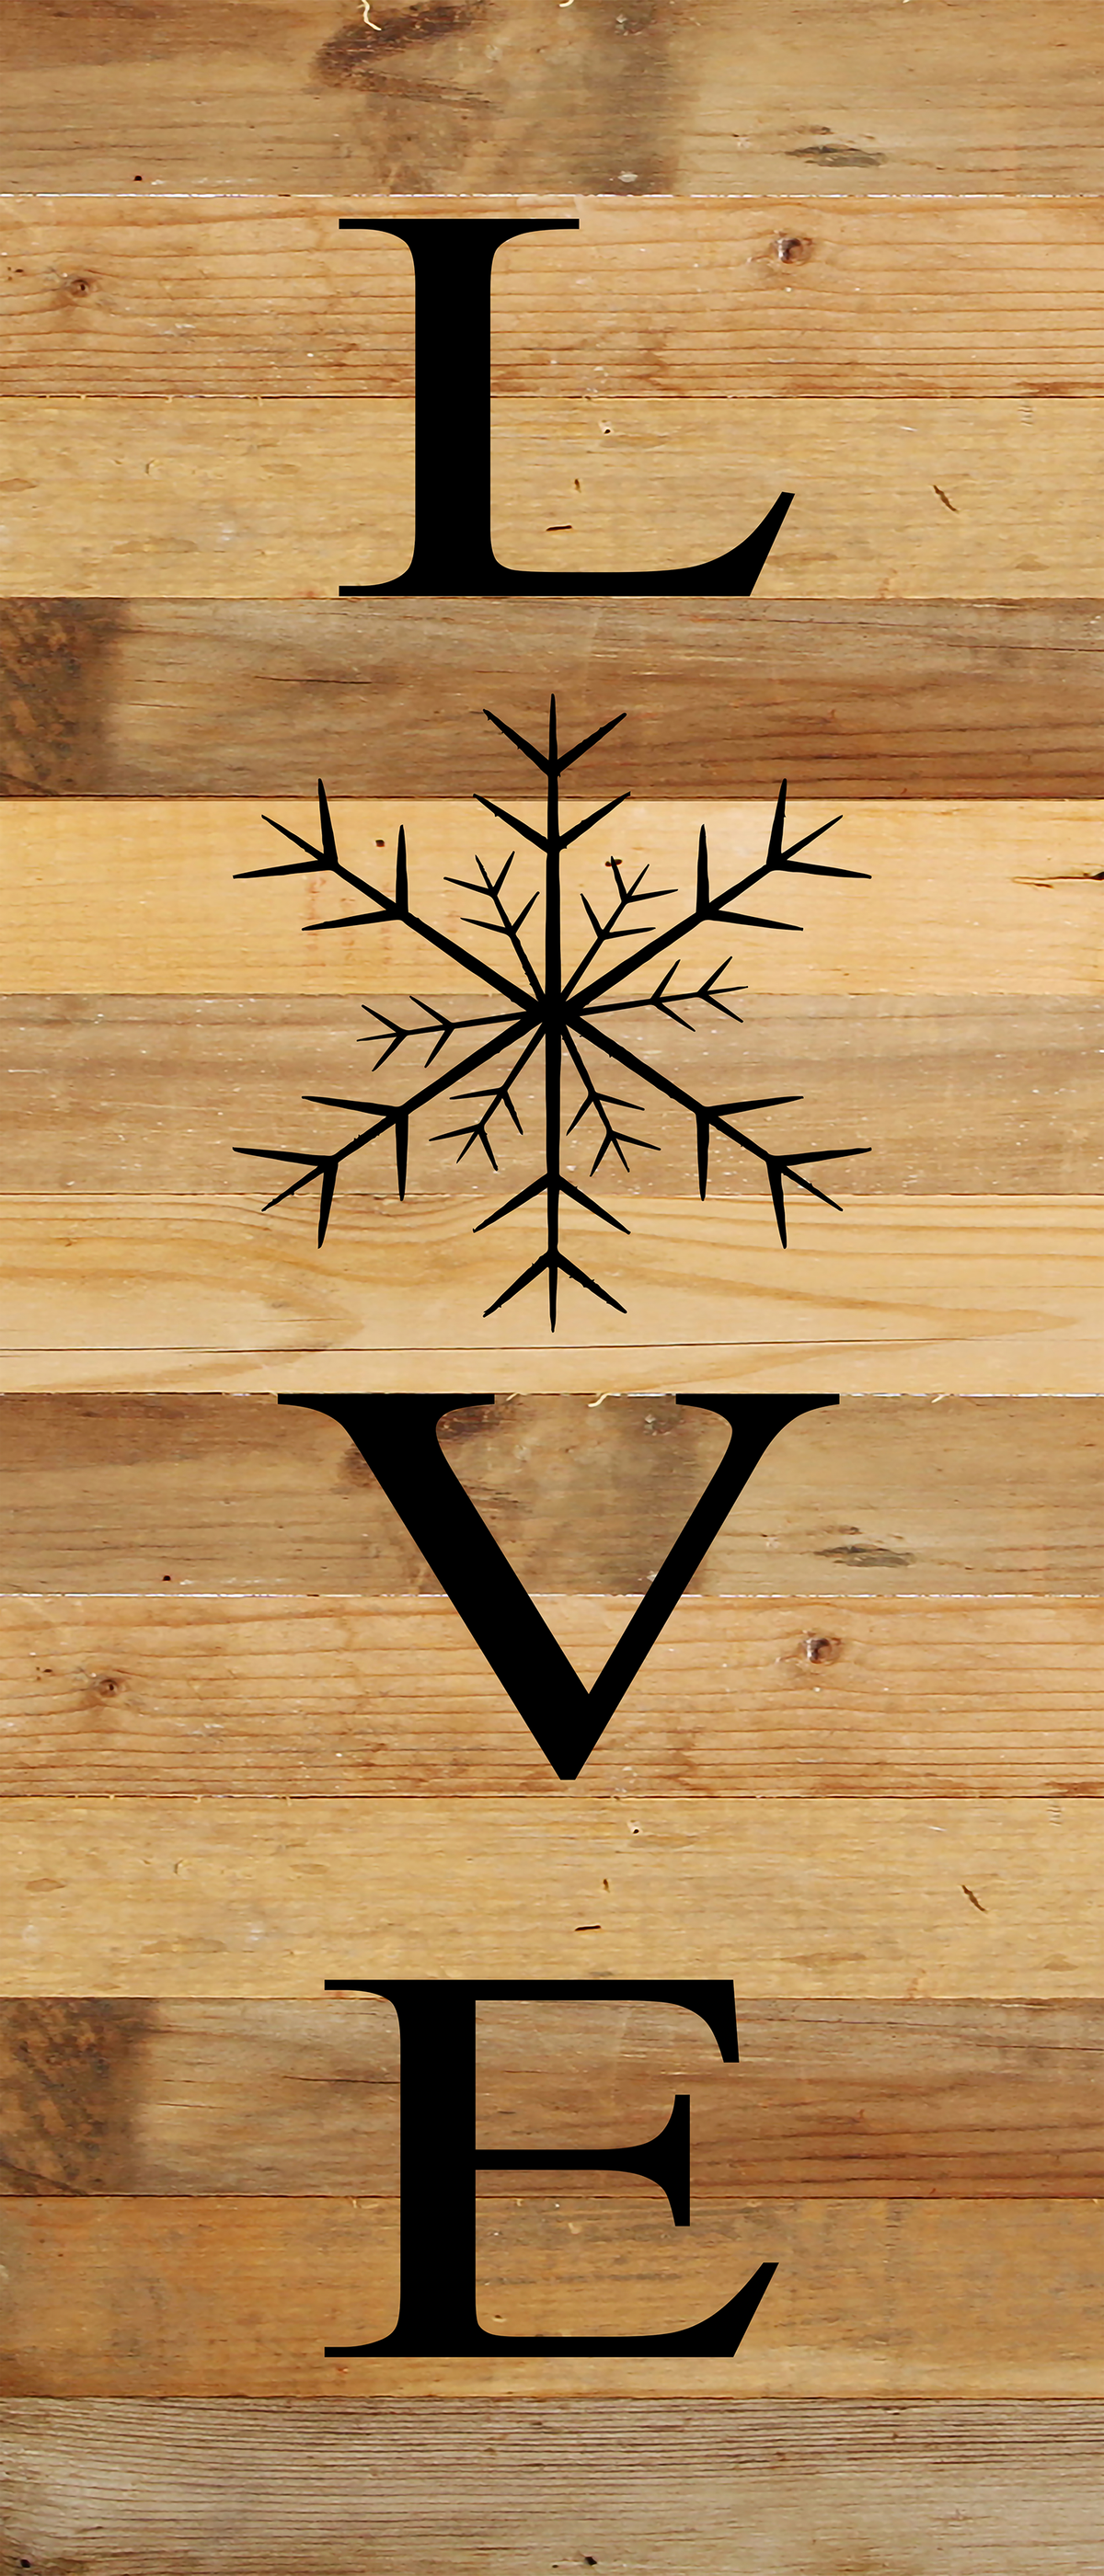 Love (with snowflake for O) / 6"x14" Reclaimed Wood Sign